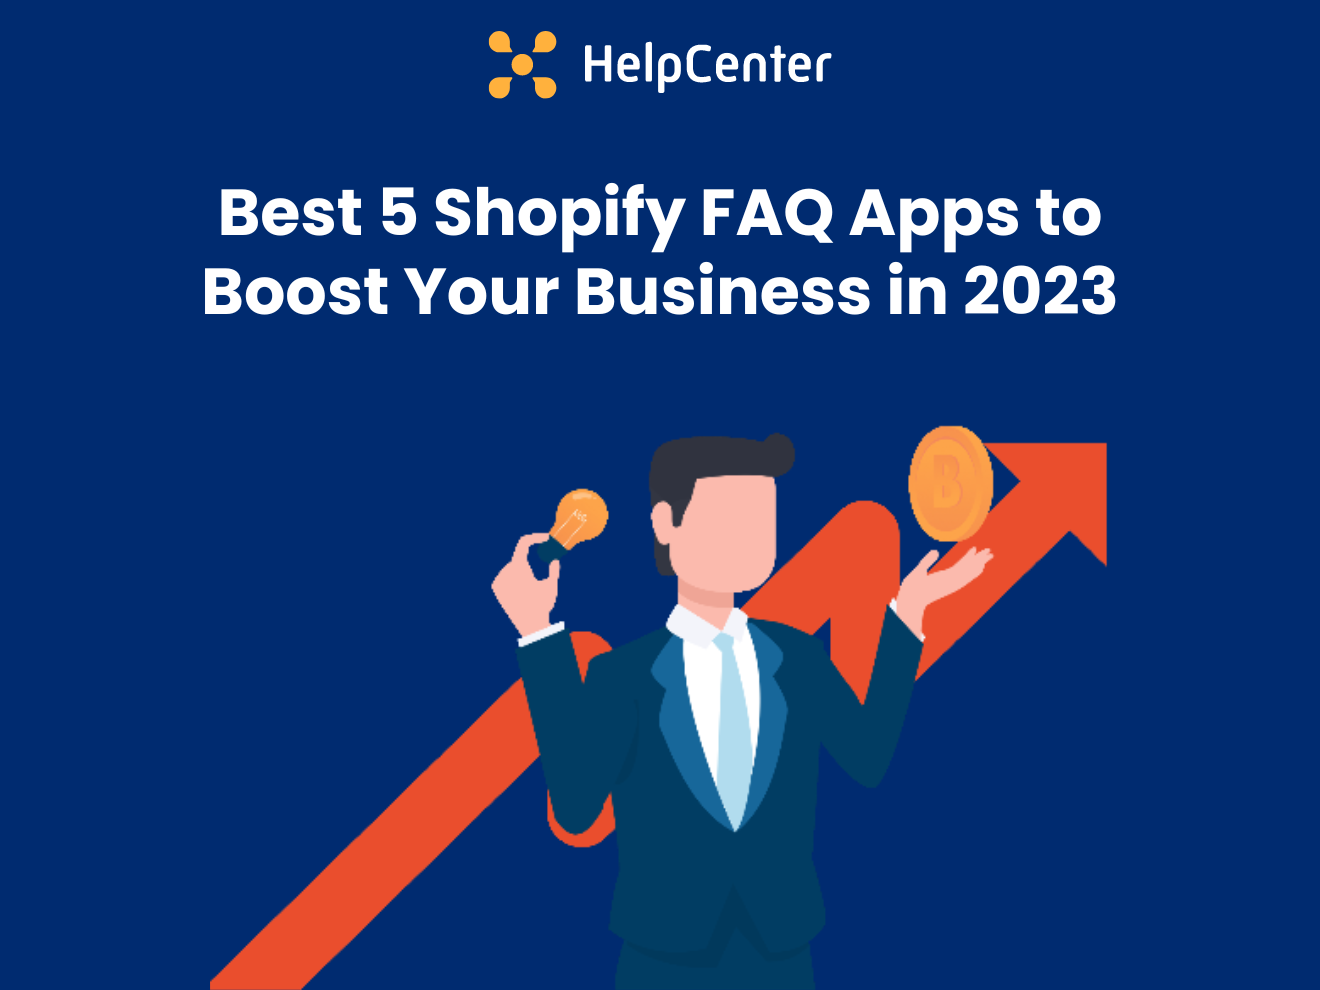 Best 5 Shopify FAQ Apps to Boost Your Business in 2023